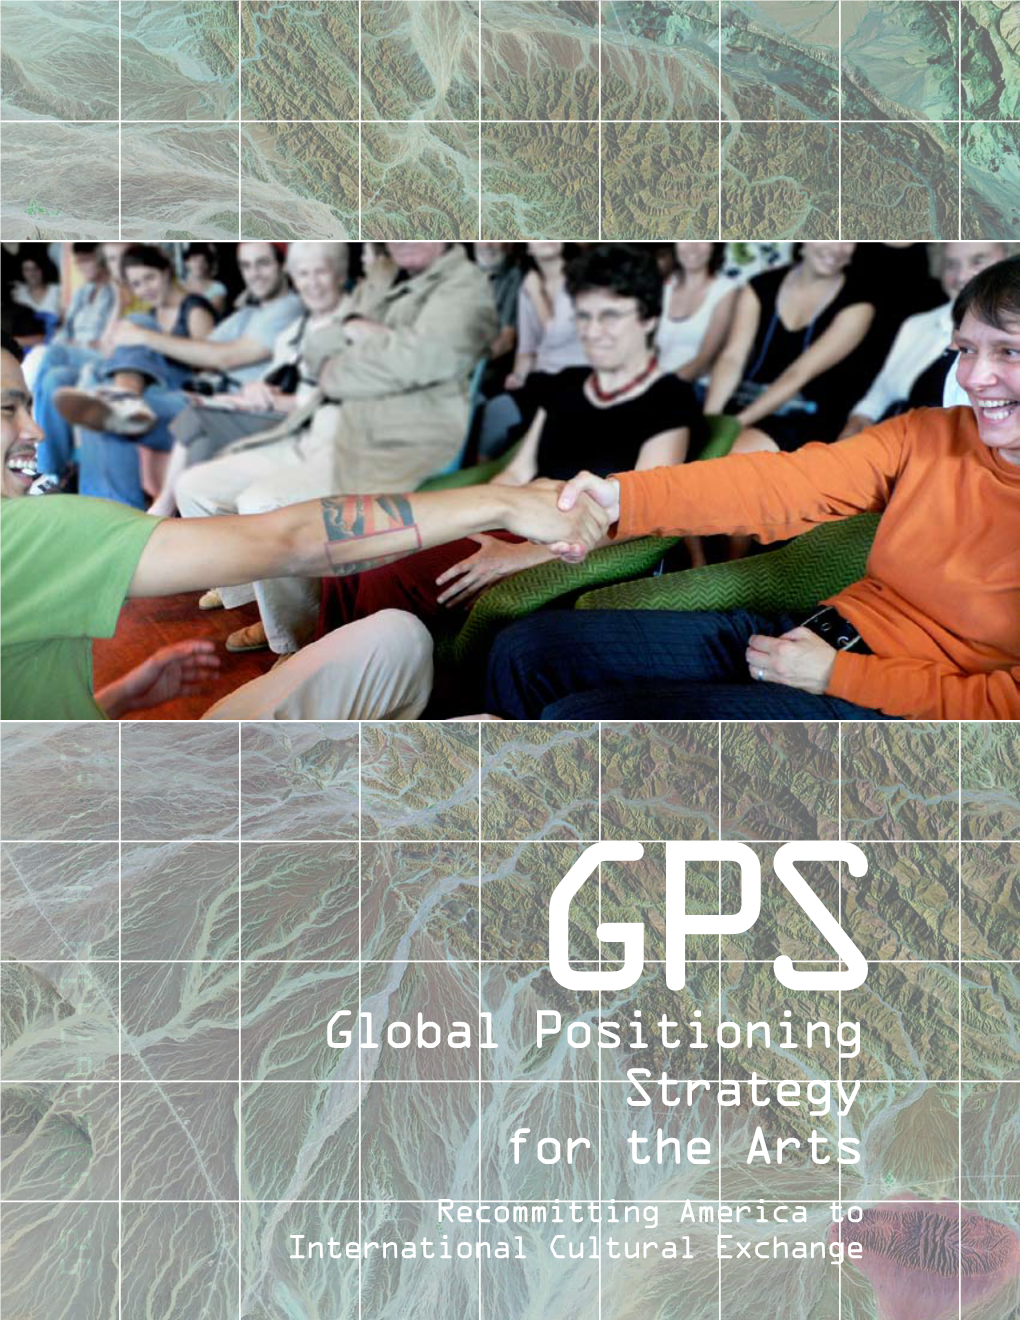 Global Positioning Strategy for the Arts